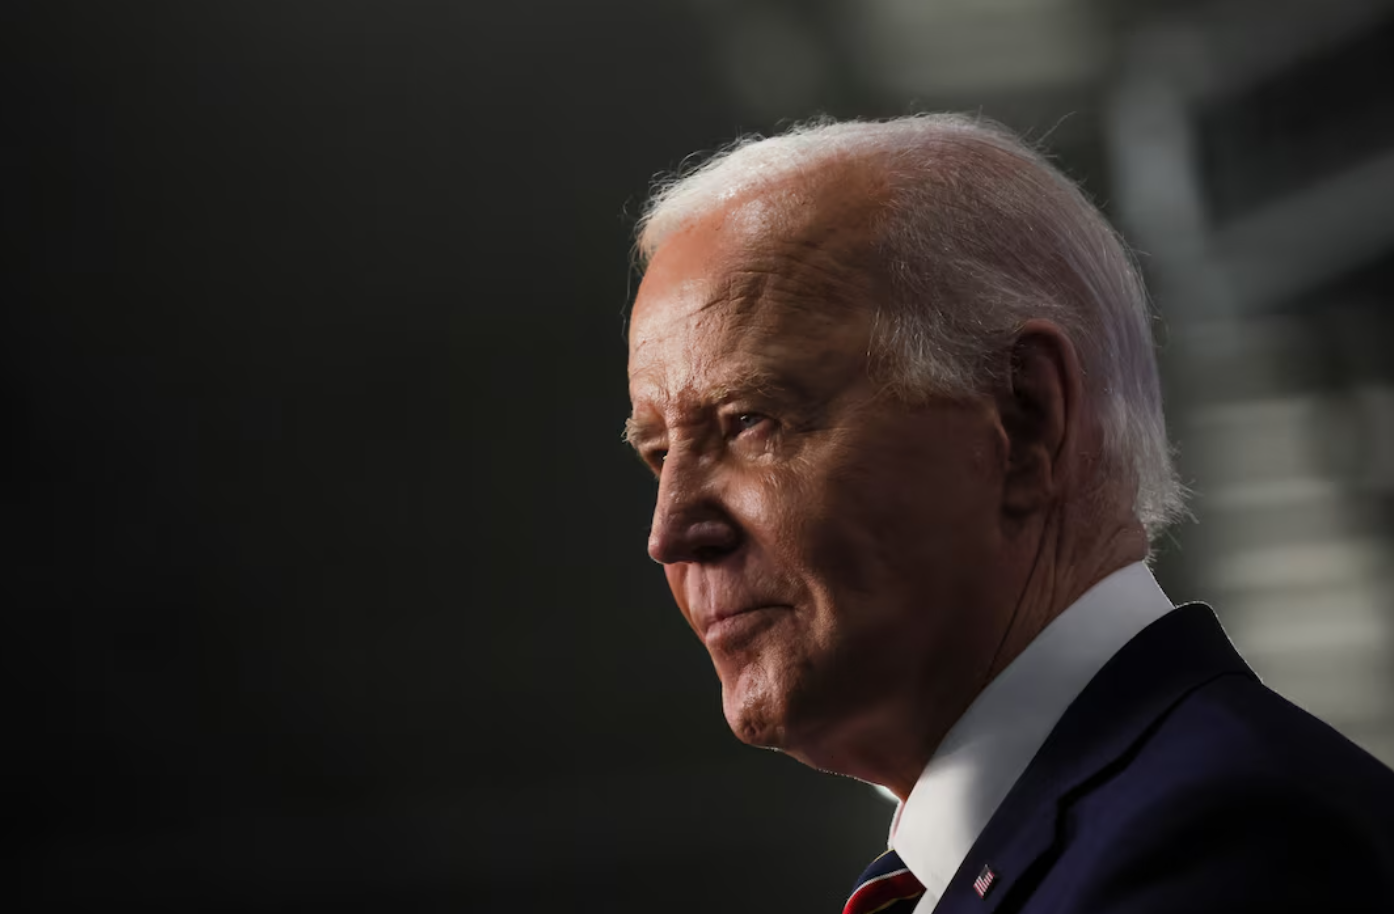 Biden calls Trump a ‘convicted felon’ who is unfit for office